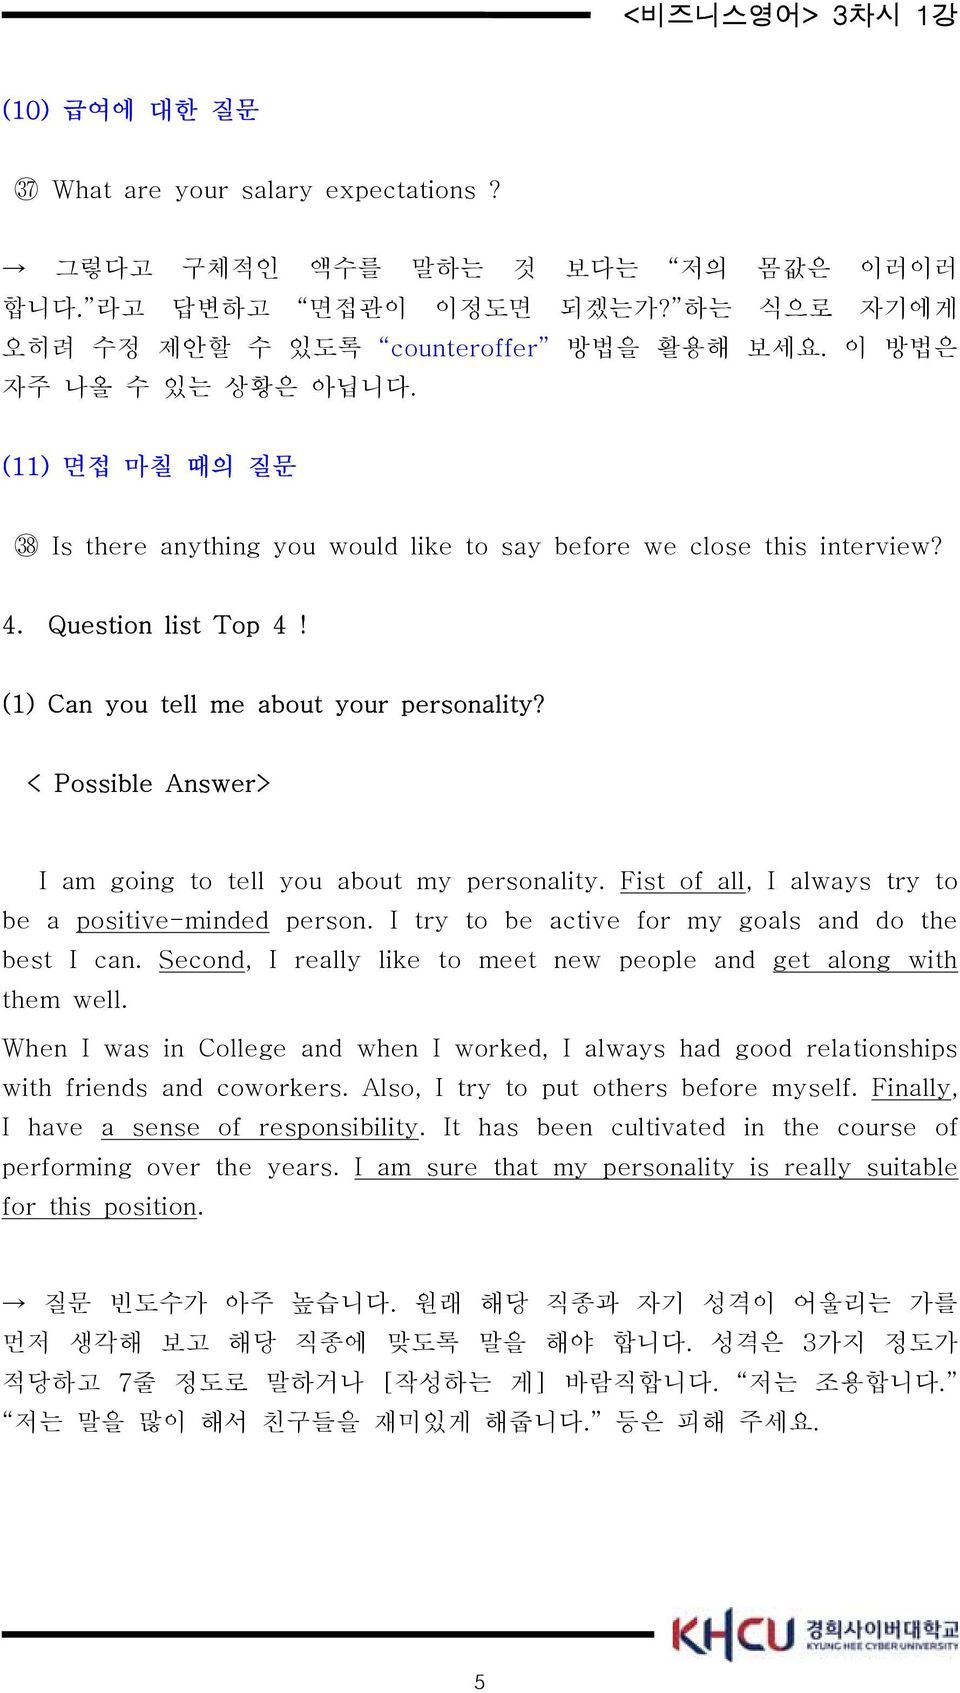 < Possible Answer> I am going to tell you about my personality. Fist of all, I always try to be a positive-minded person. I try to be active for my goals and do the best I can.